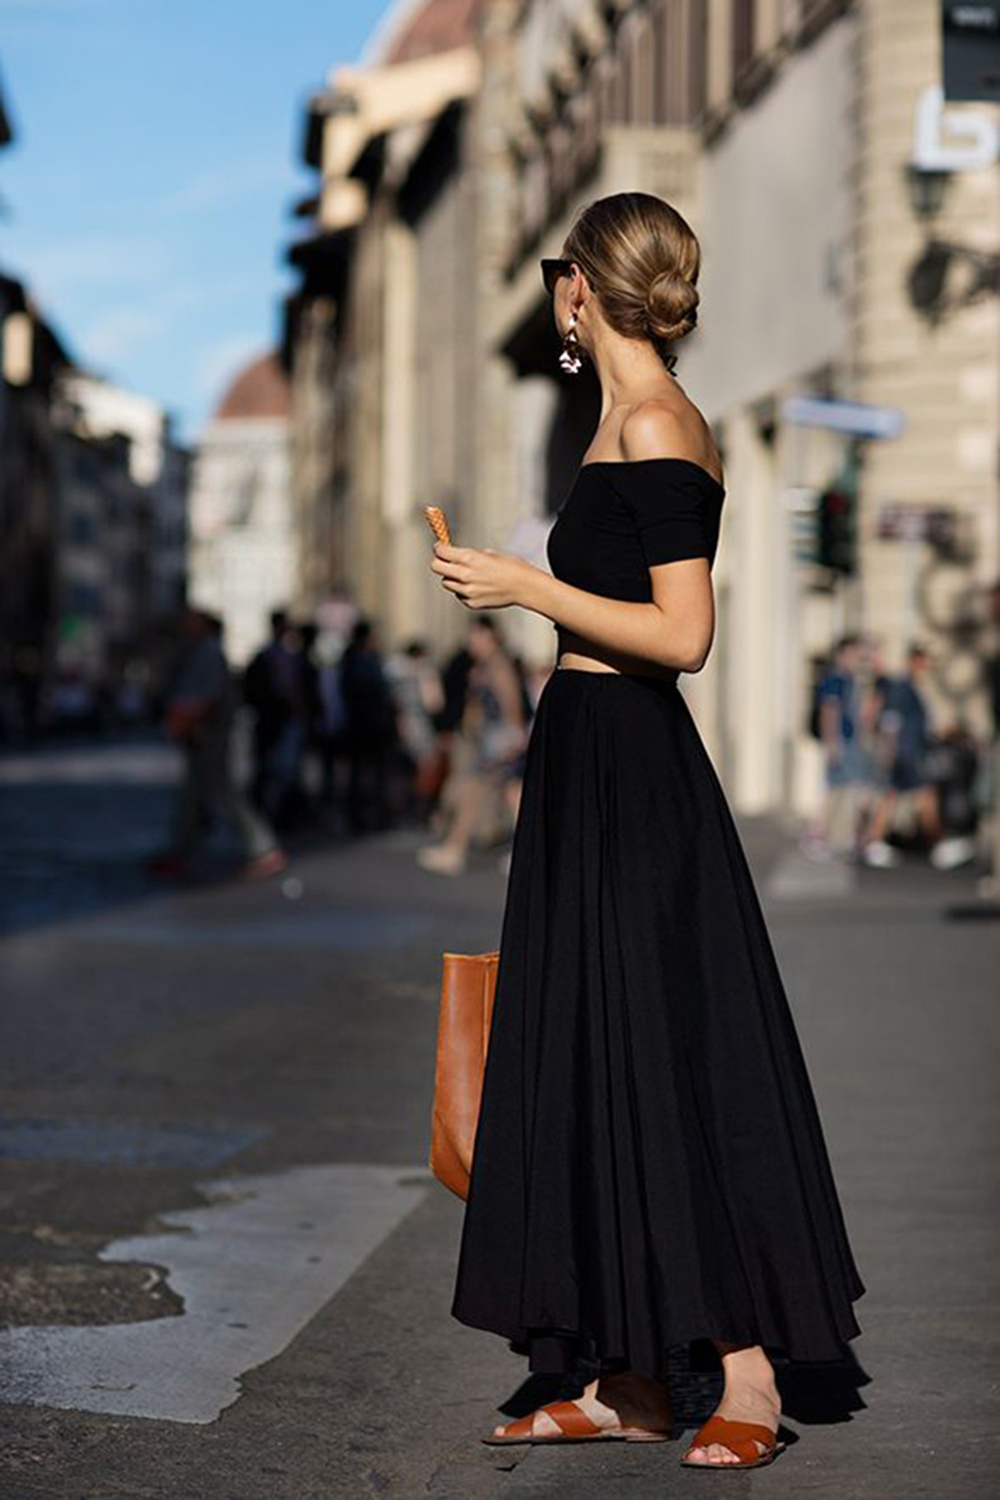 Style-Minimalism-Trends-Off-The-Shoulder-Looks-002